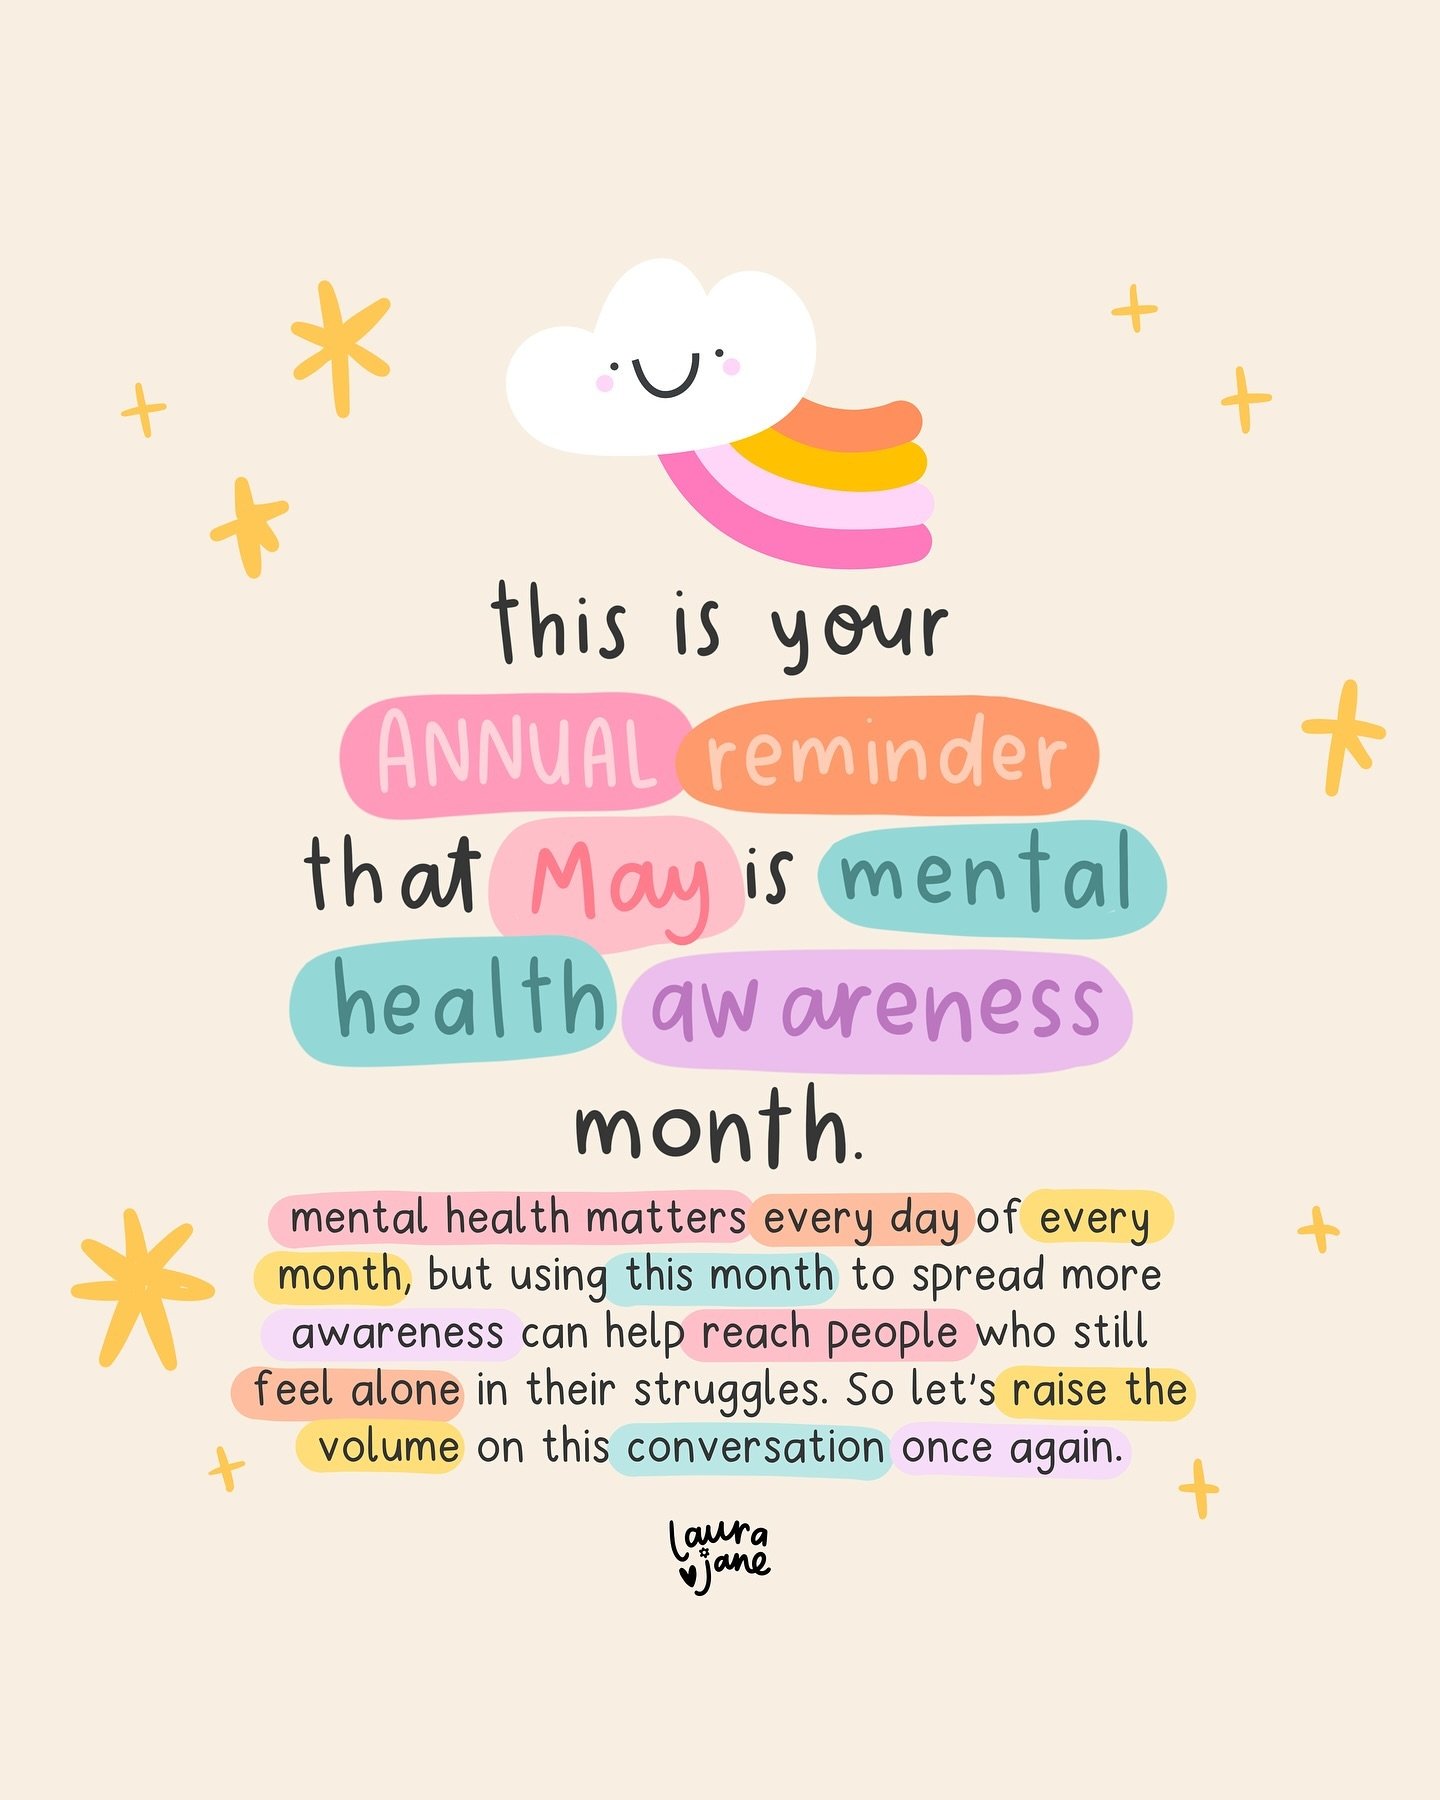 PSA: it&rsquo;s May which means it&rsquo;s also #mentalhealthawareness month 📢

I say this every year, but I&rsquo;ll say it again:
Your mental health matters EVERY month.

However, this month is always an opportunity to put the conversation around 